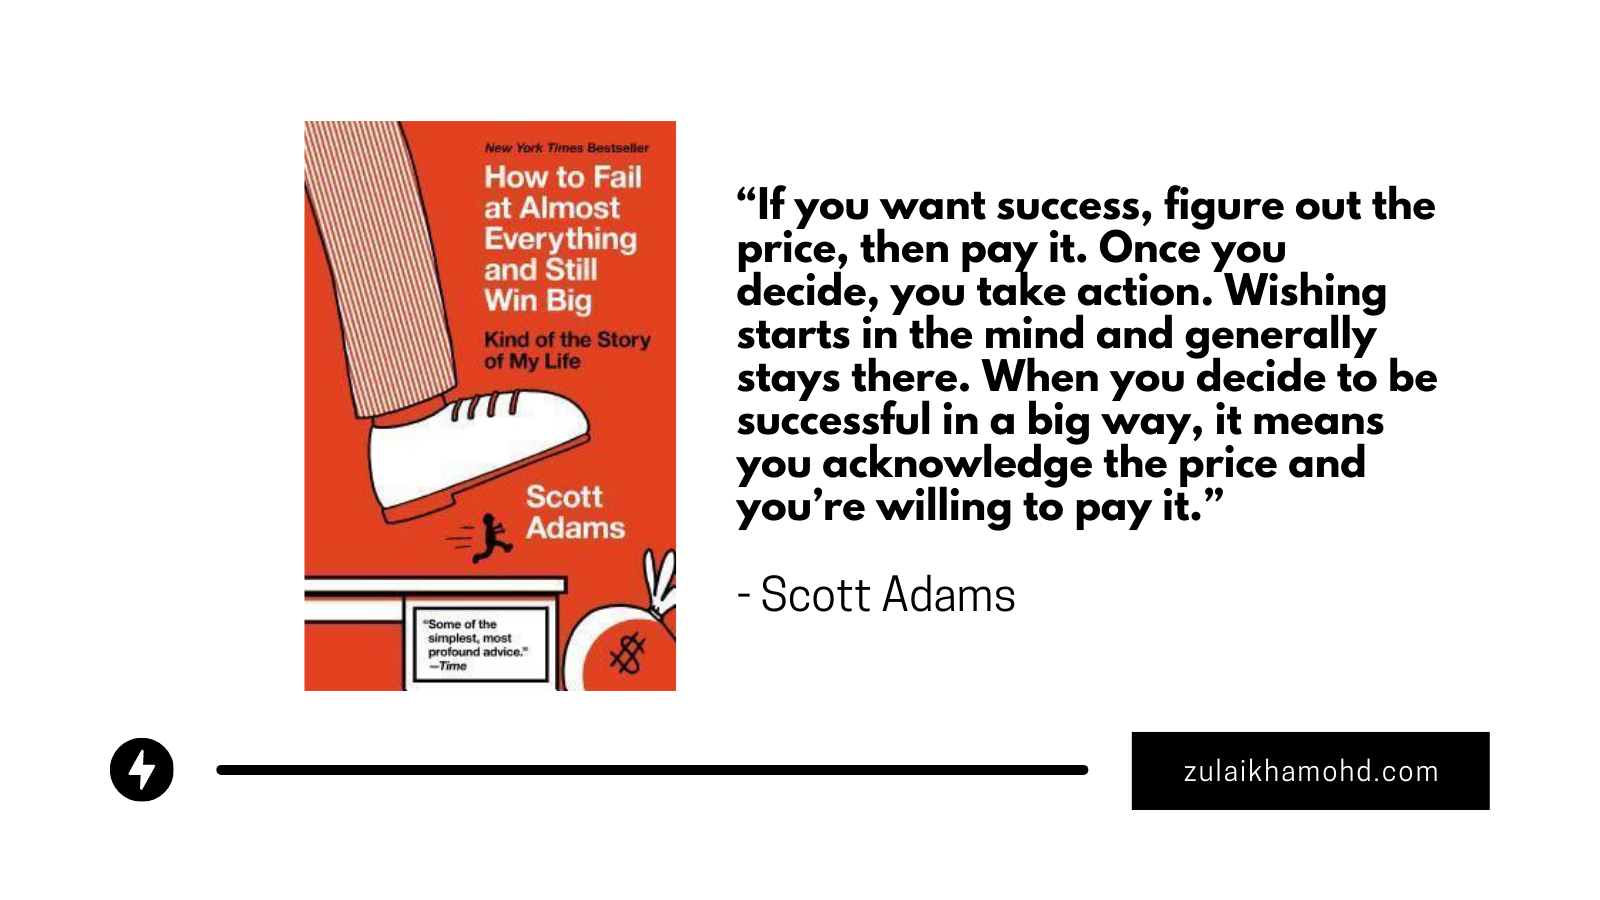 How To Fail At Almost Everything And Still Win Big by Scott Adams